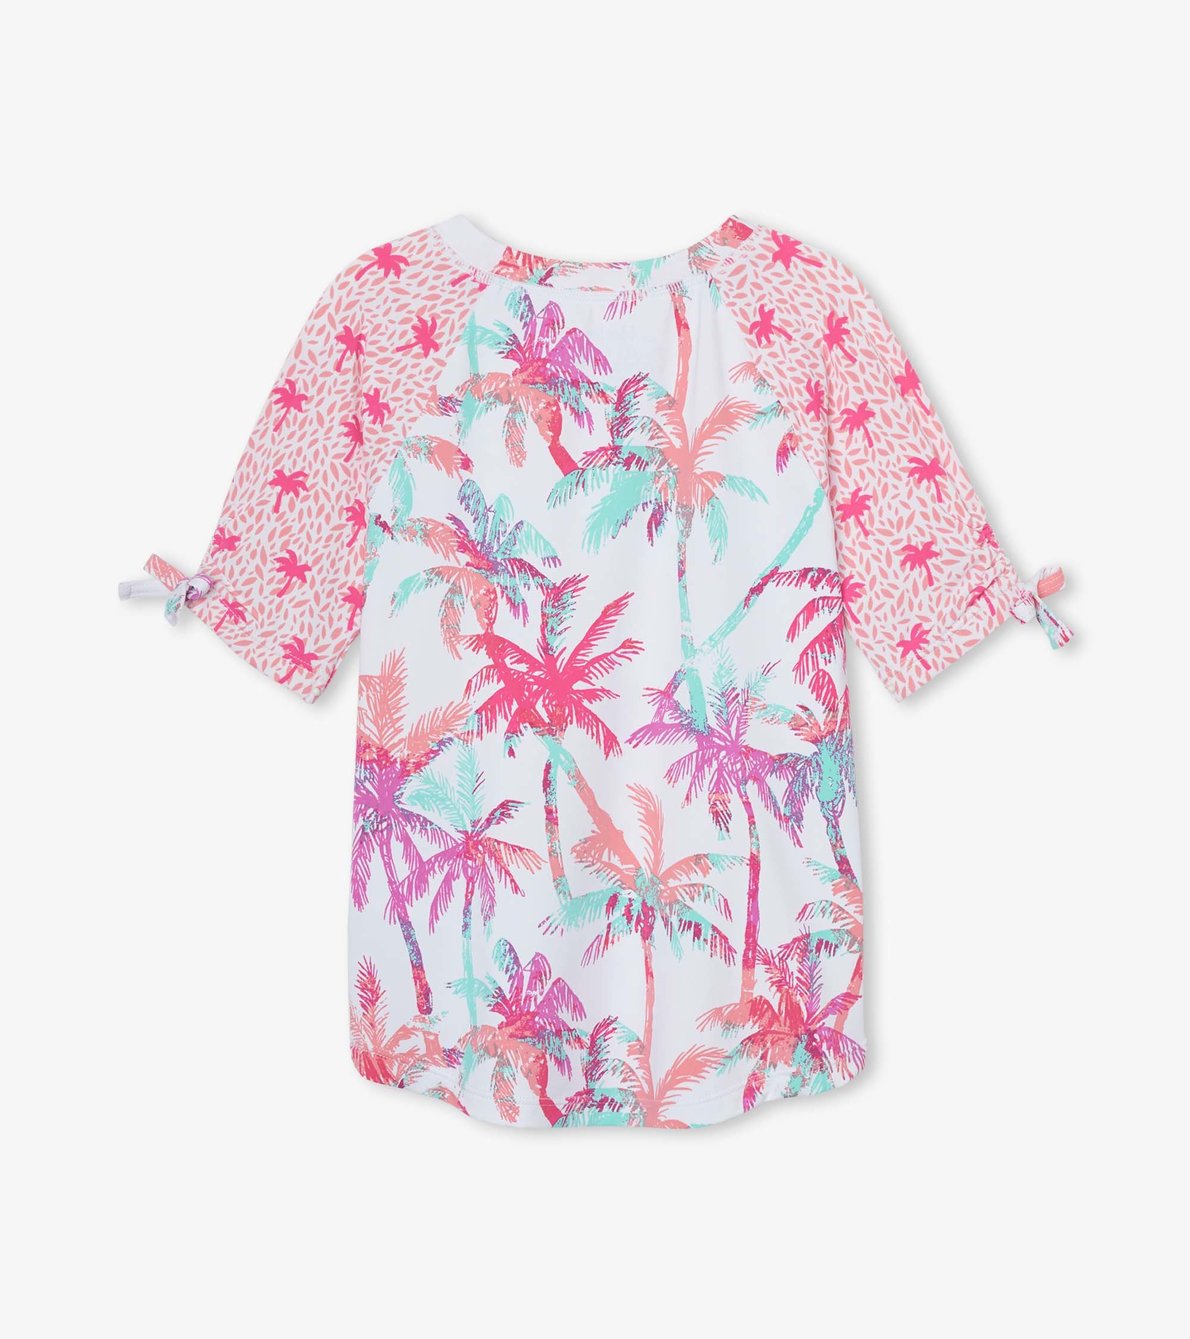 View larger image of Ombre Palms Short Sleeve Rashguard